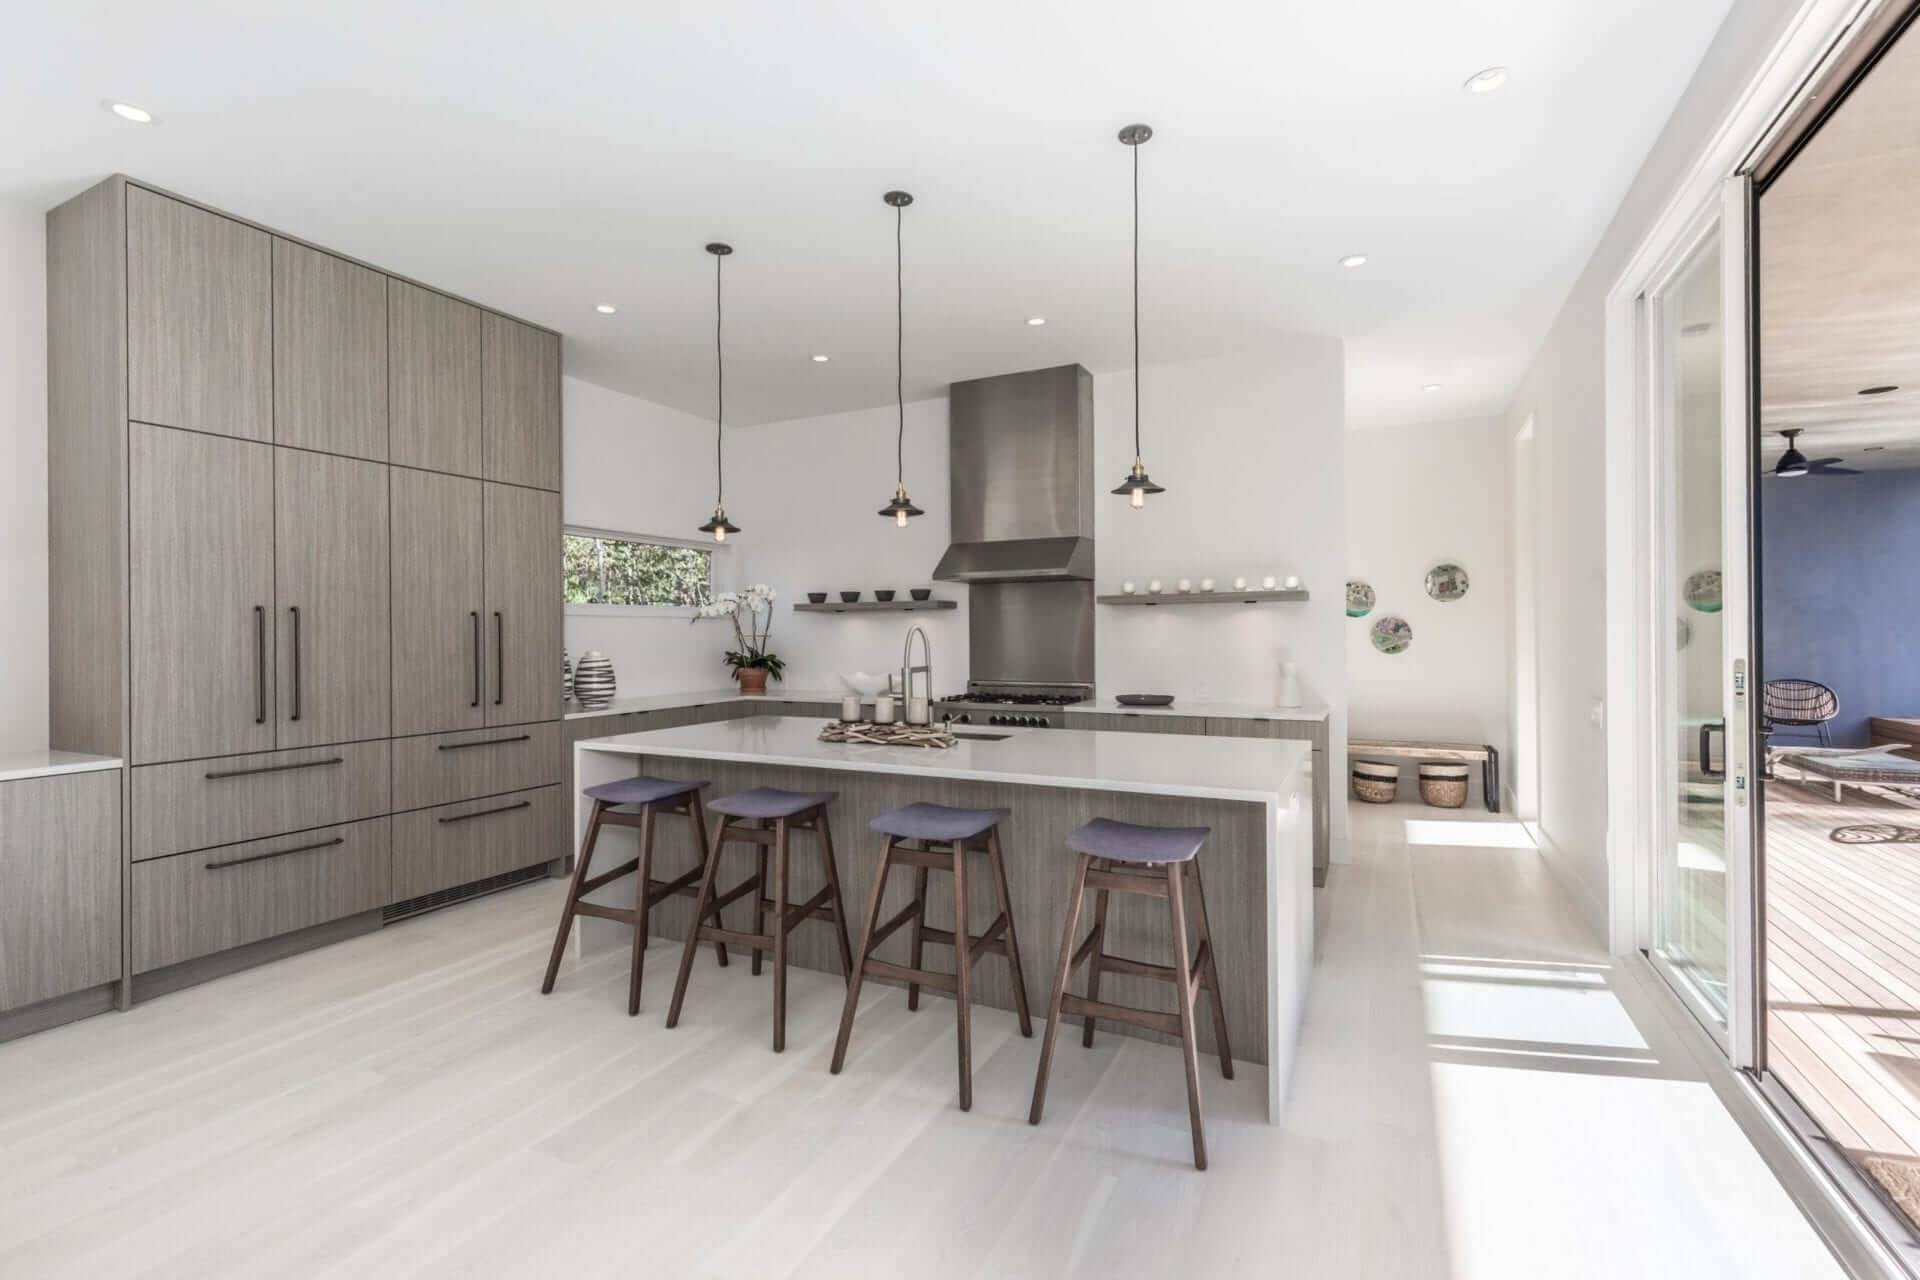 Grey Nantucket vertical laminate Brookhaven cabinetry lends a modern vibe to this monochromatic open kitchen.